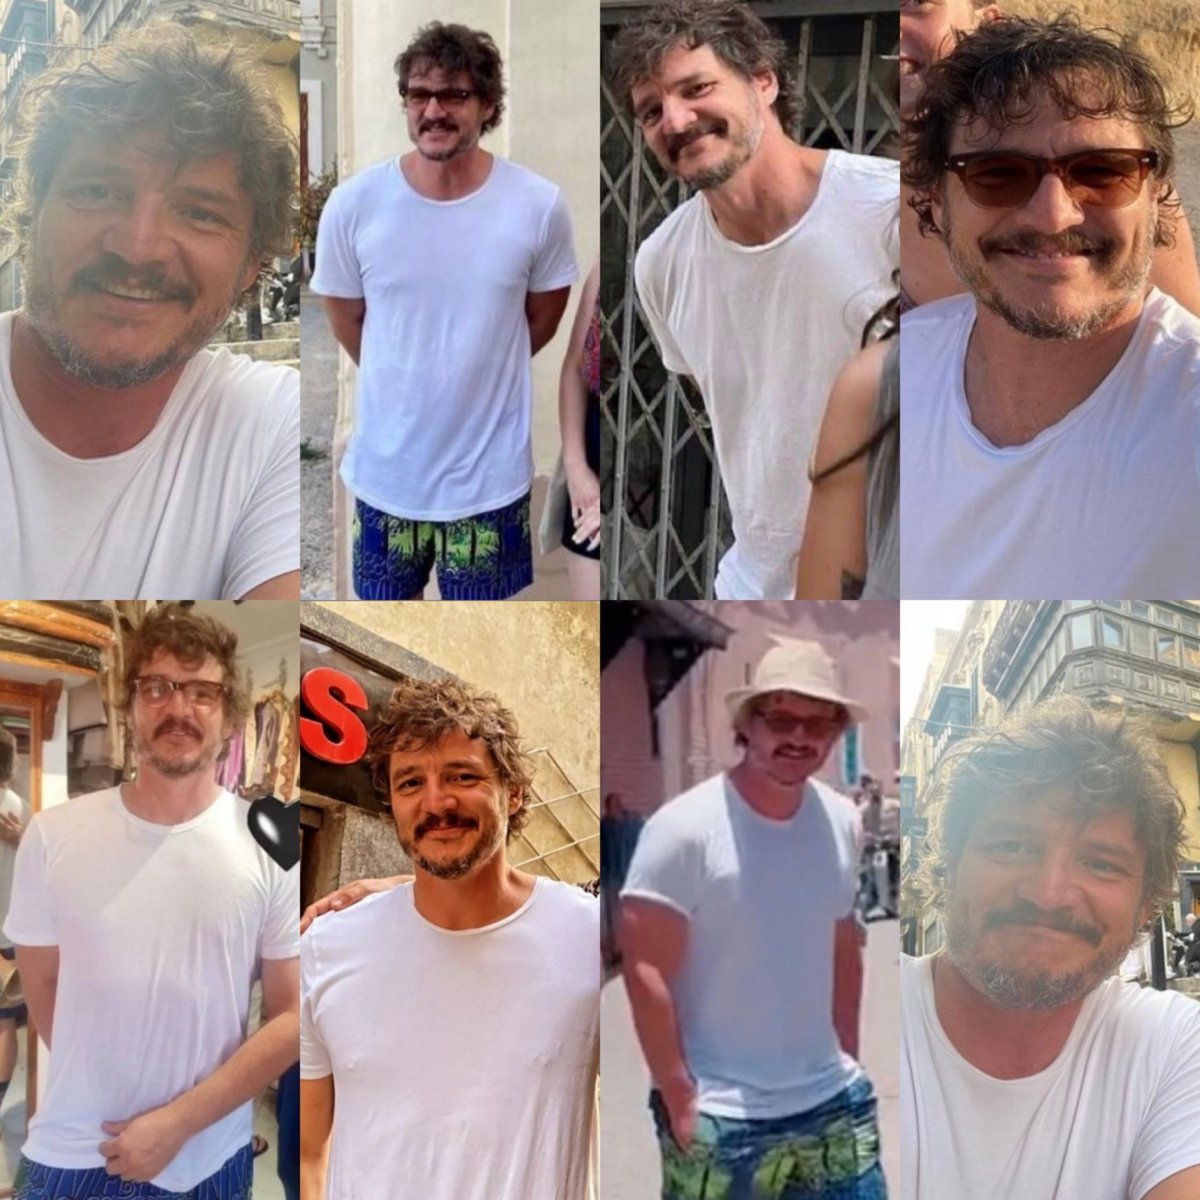 the gladiator 2 pedro pascal era is feeding us so well in his white tshirt tourist take a picture with everyone fit 🥺